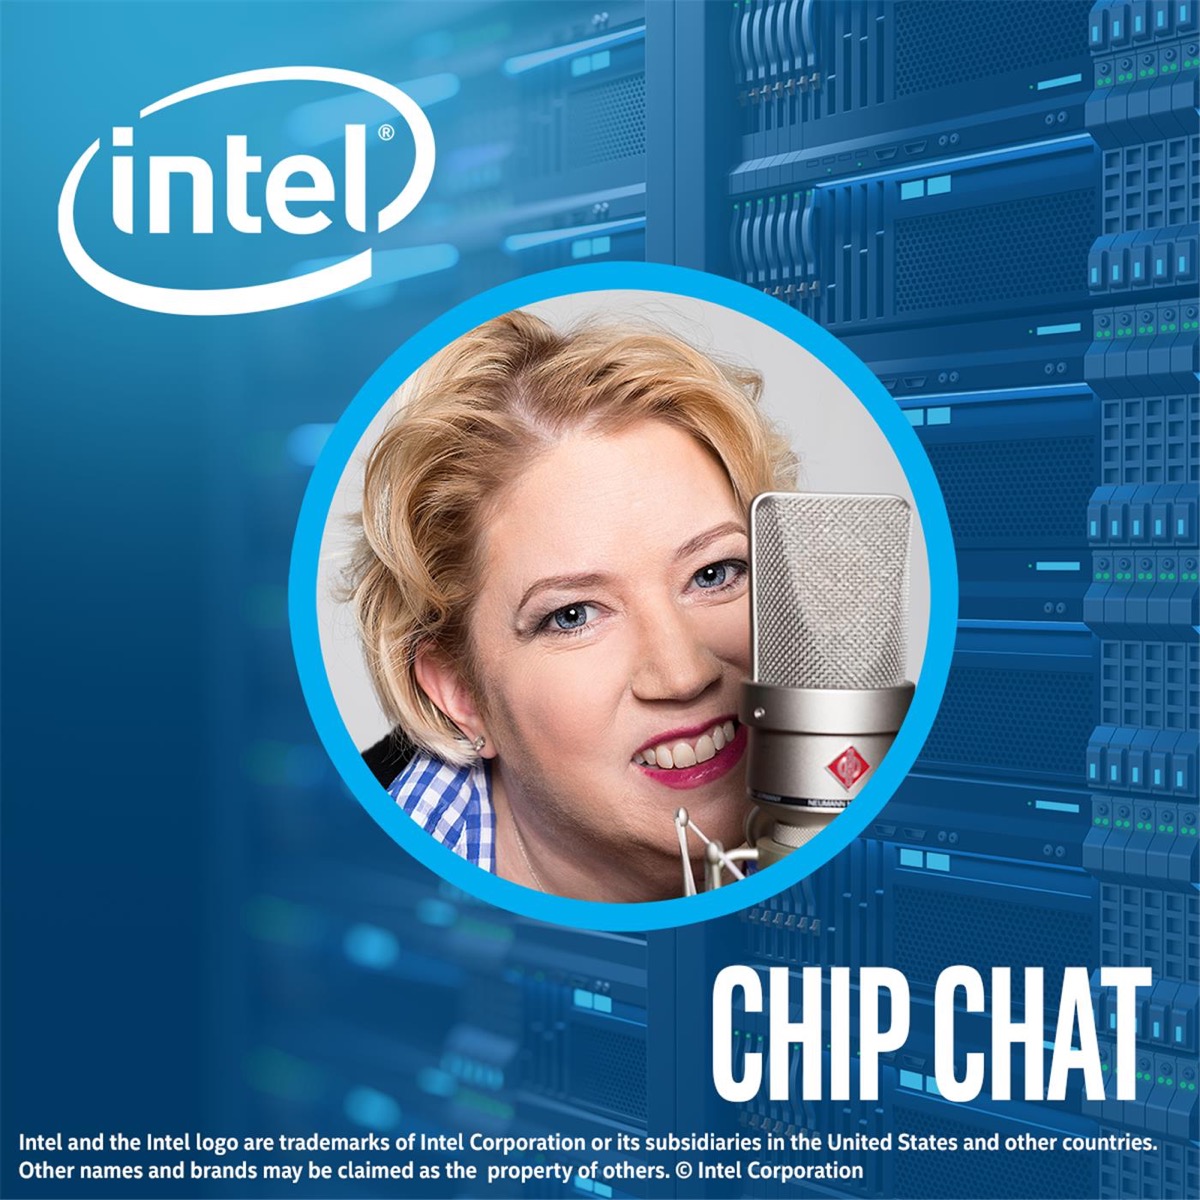 Intel Chip Chat LIVE from MWC 19 in Barcelona - Chip Chat ...